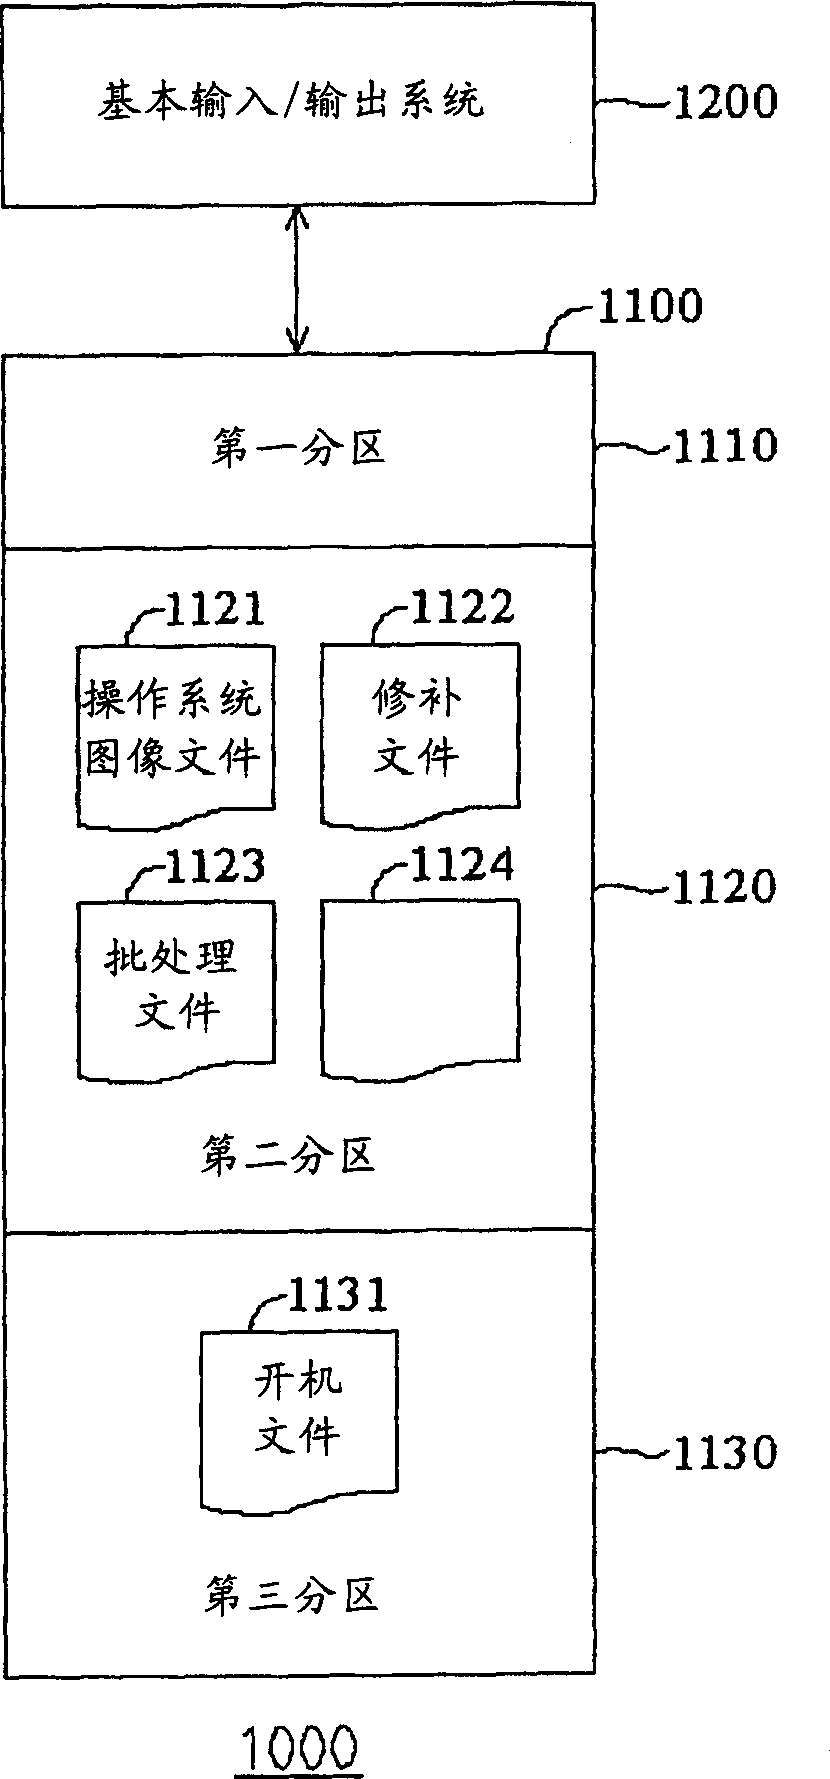 Method and device for restoring computer operation system and method for producing said system